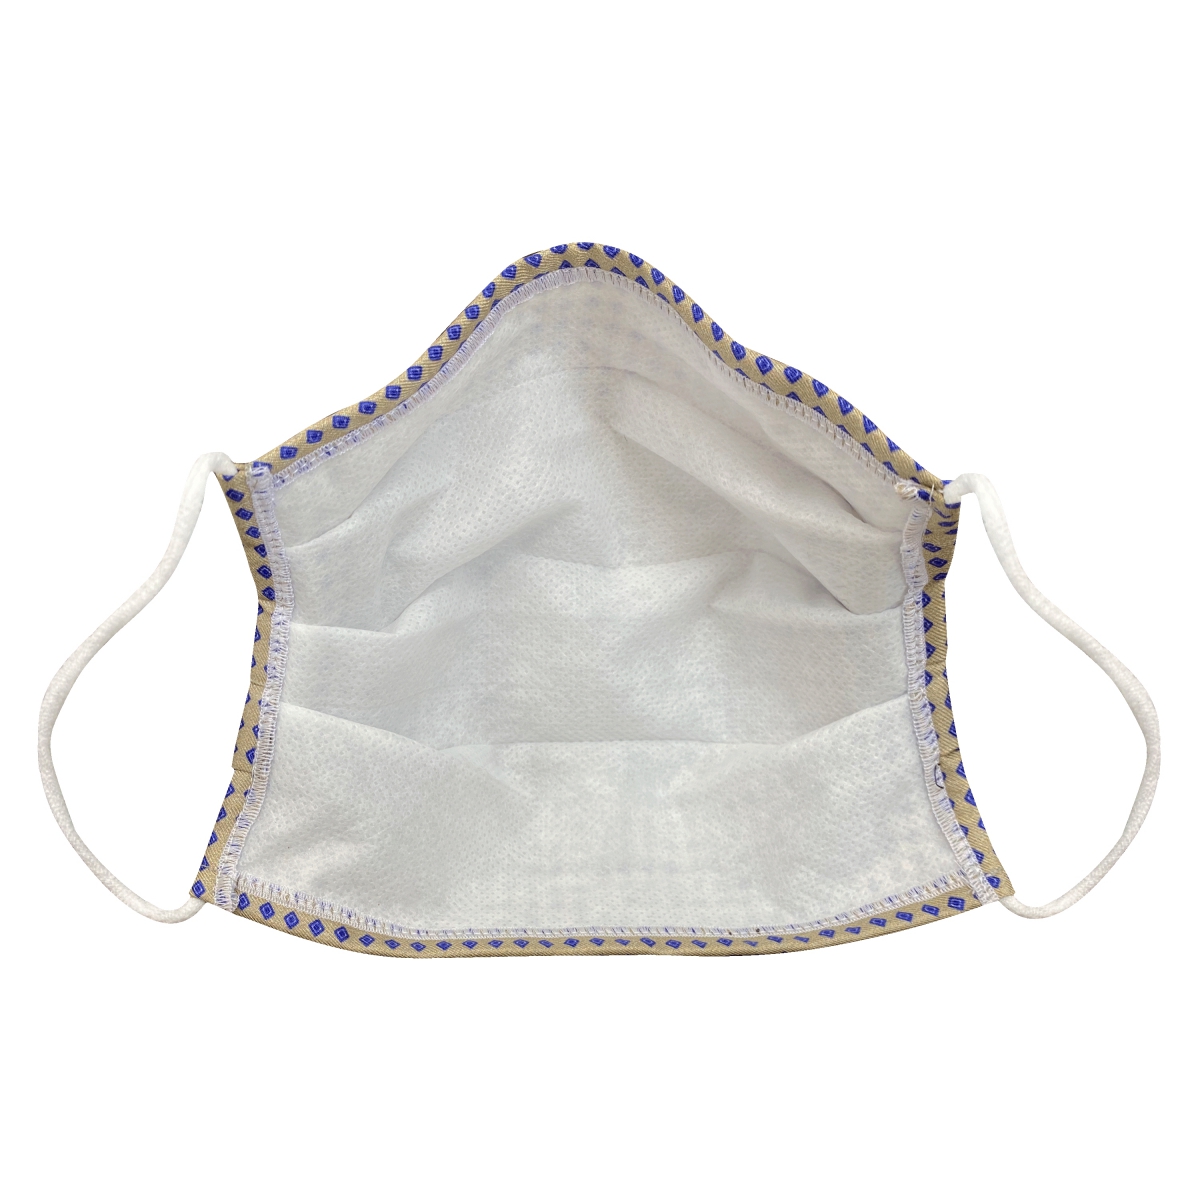 Fashion protective fabric mask, color beige with pattern